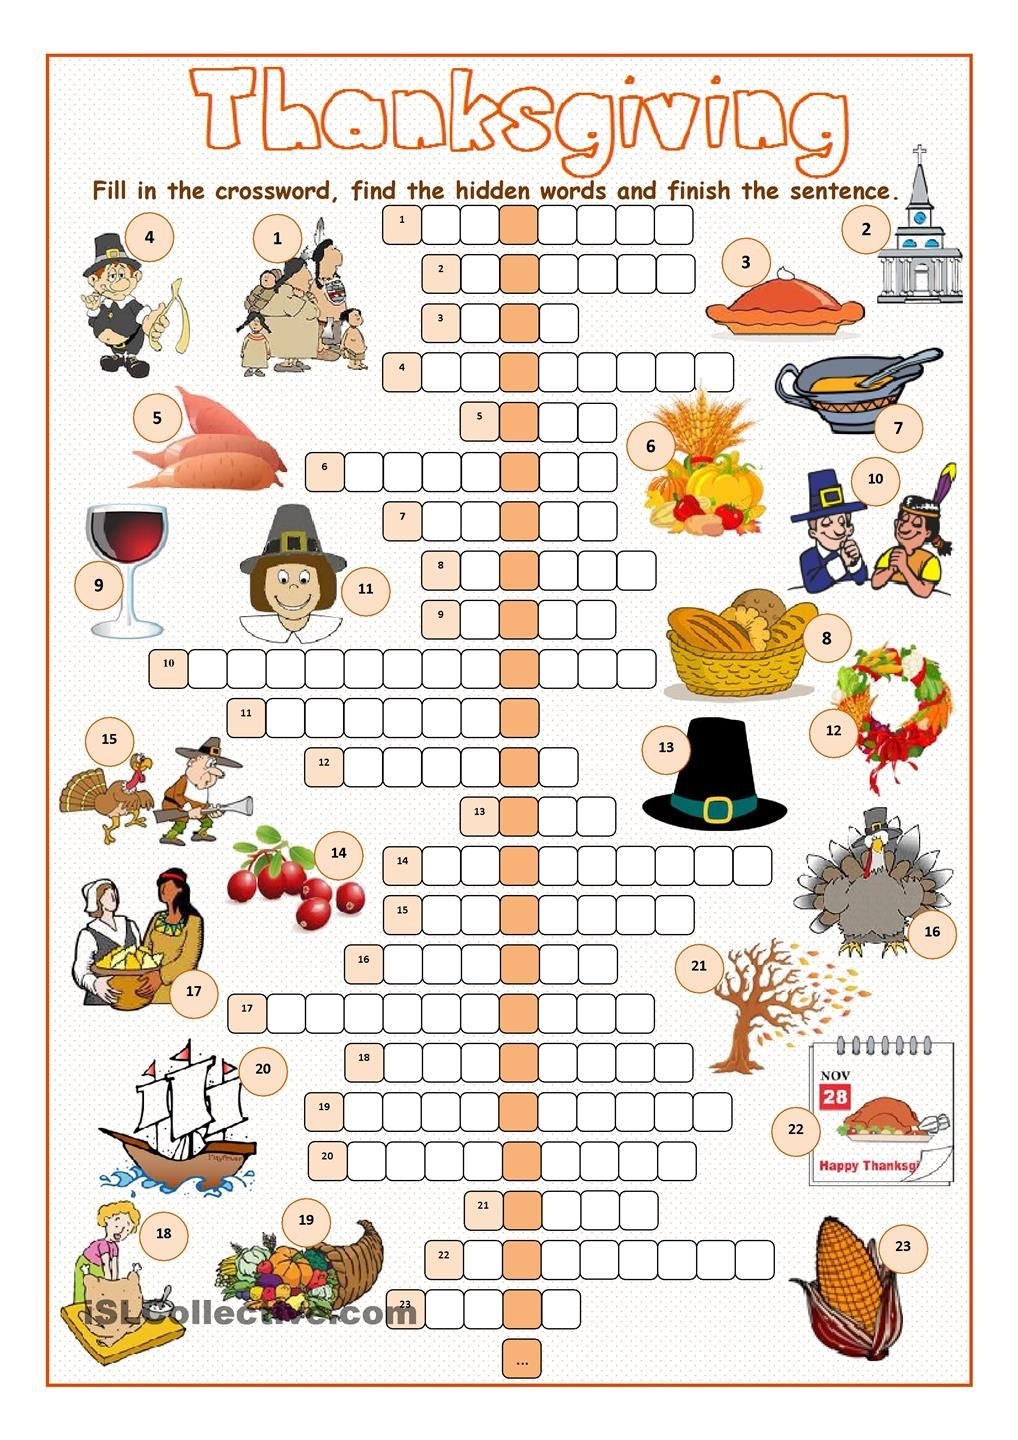 Thanksgiving Crossword Puzzle | Spanish Learning | Cours Anglais - Thanksgiving Crossword Puzzles Printable Free